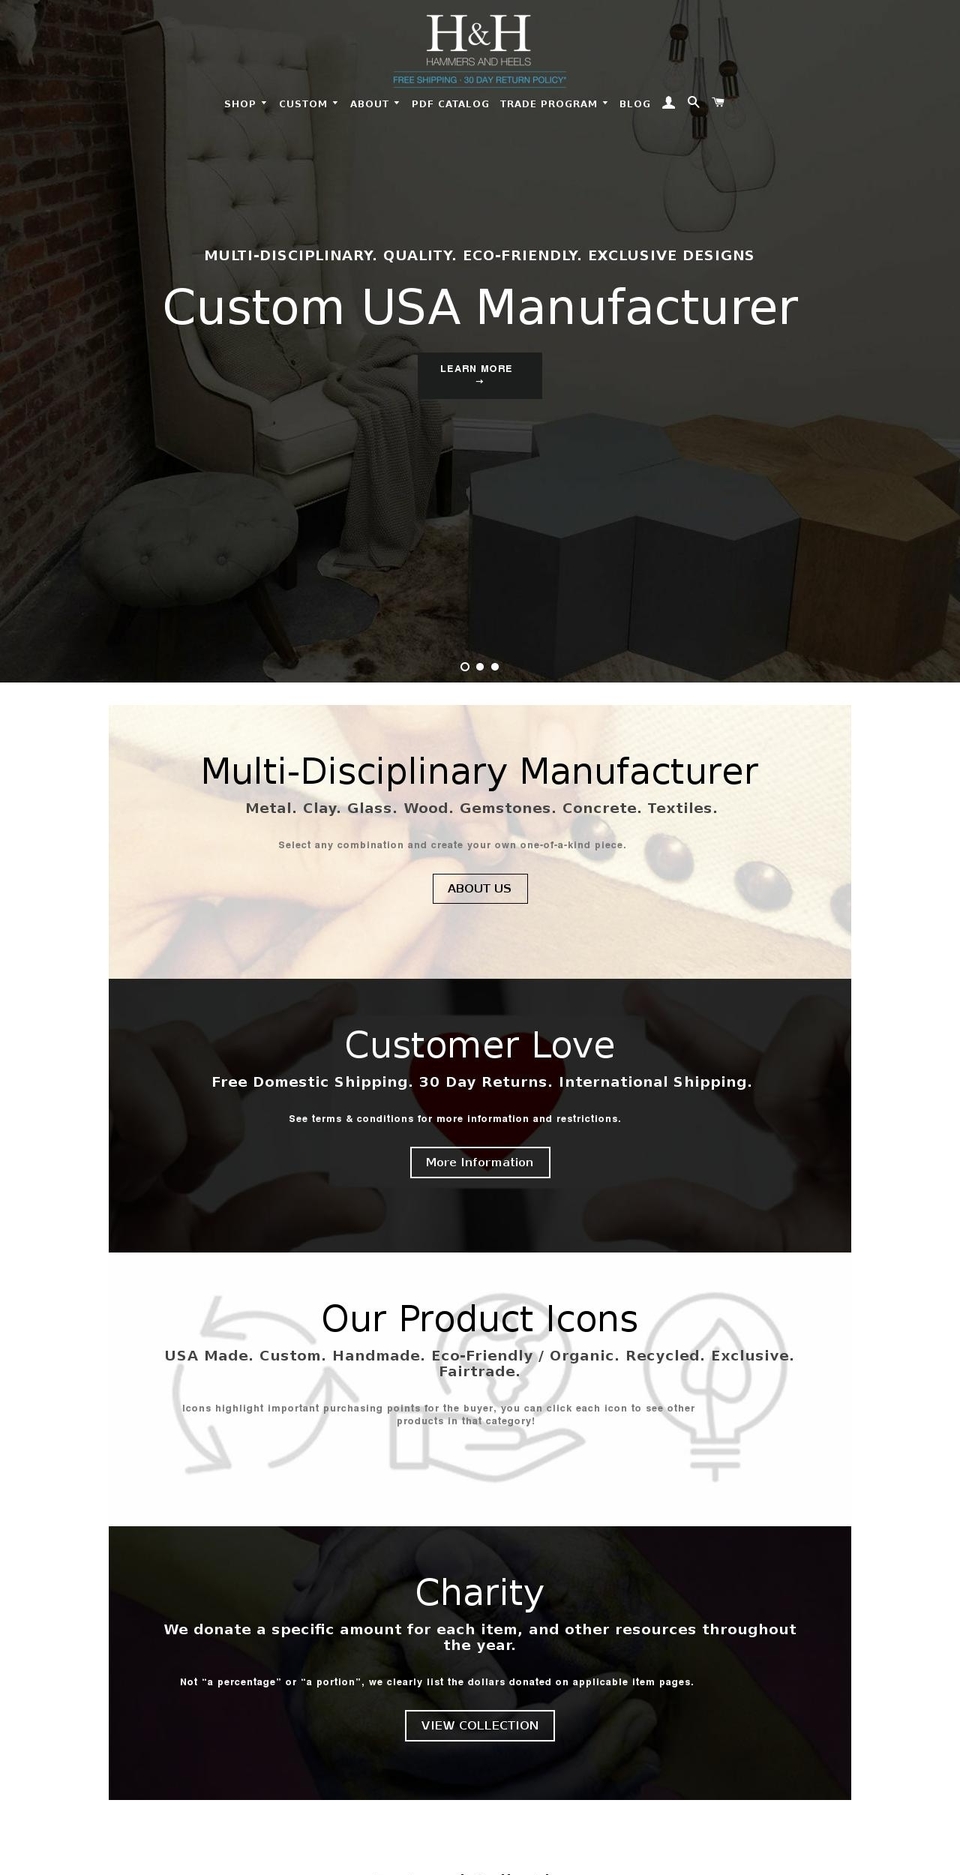 Be Yours Shopify theme site example hammersheels.com